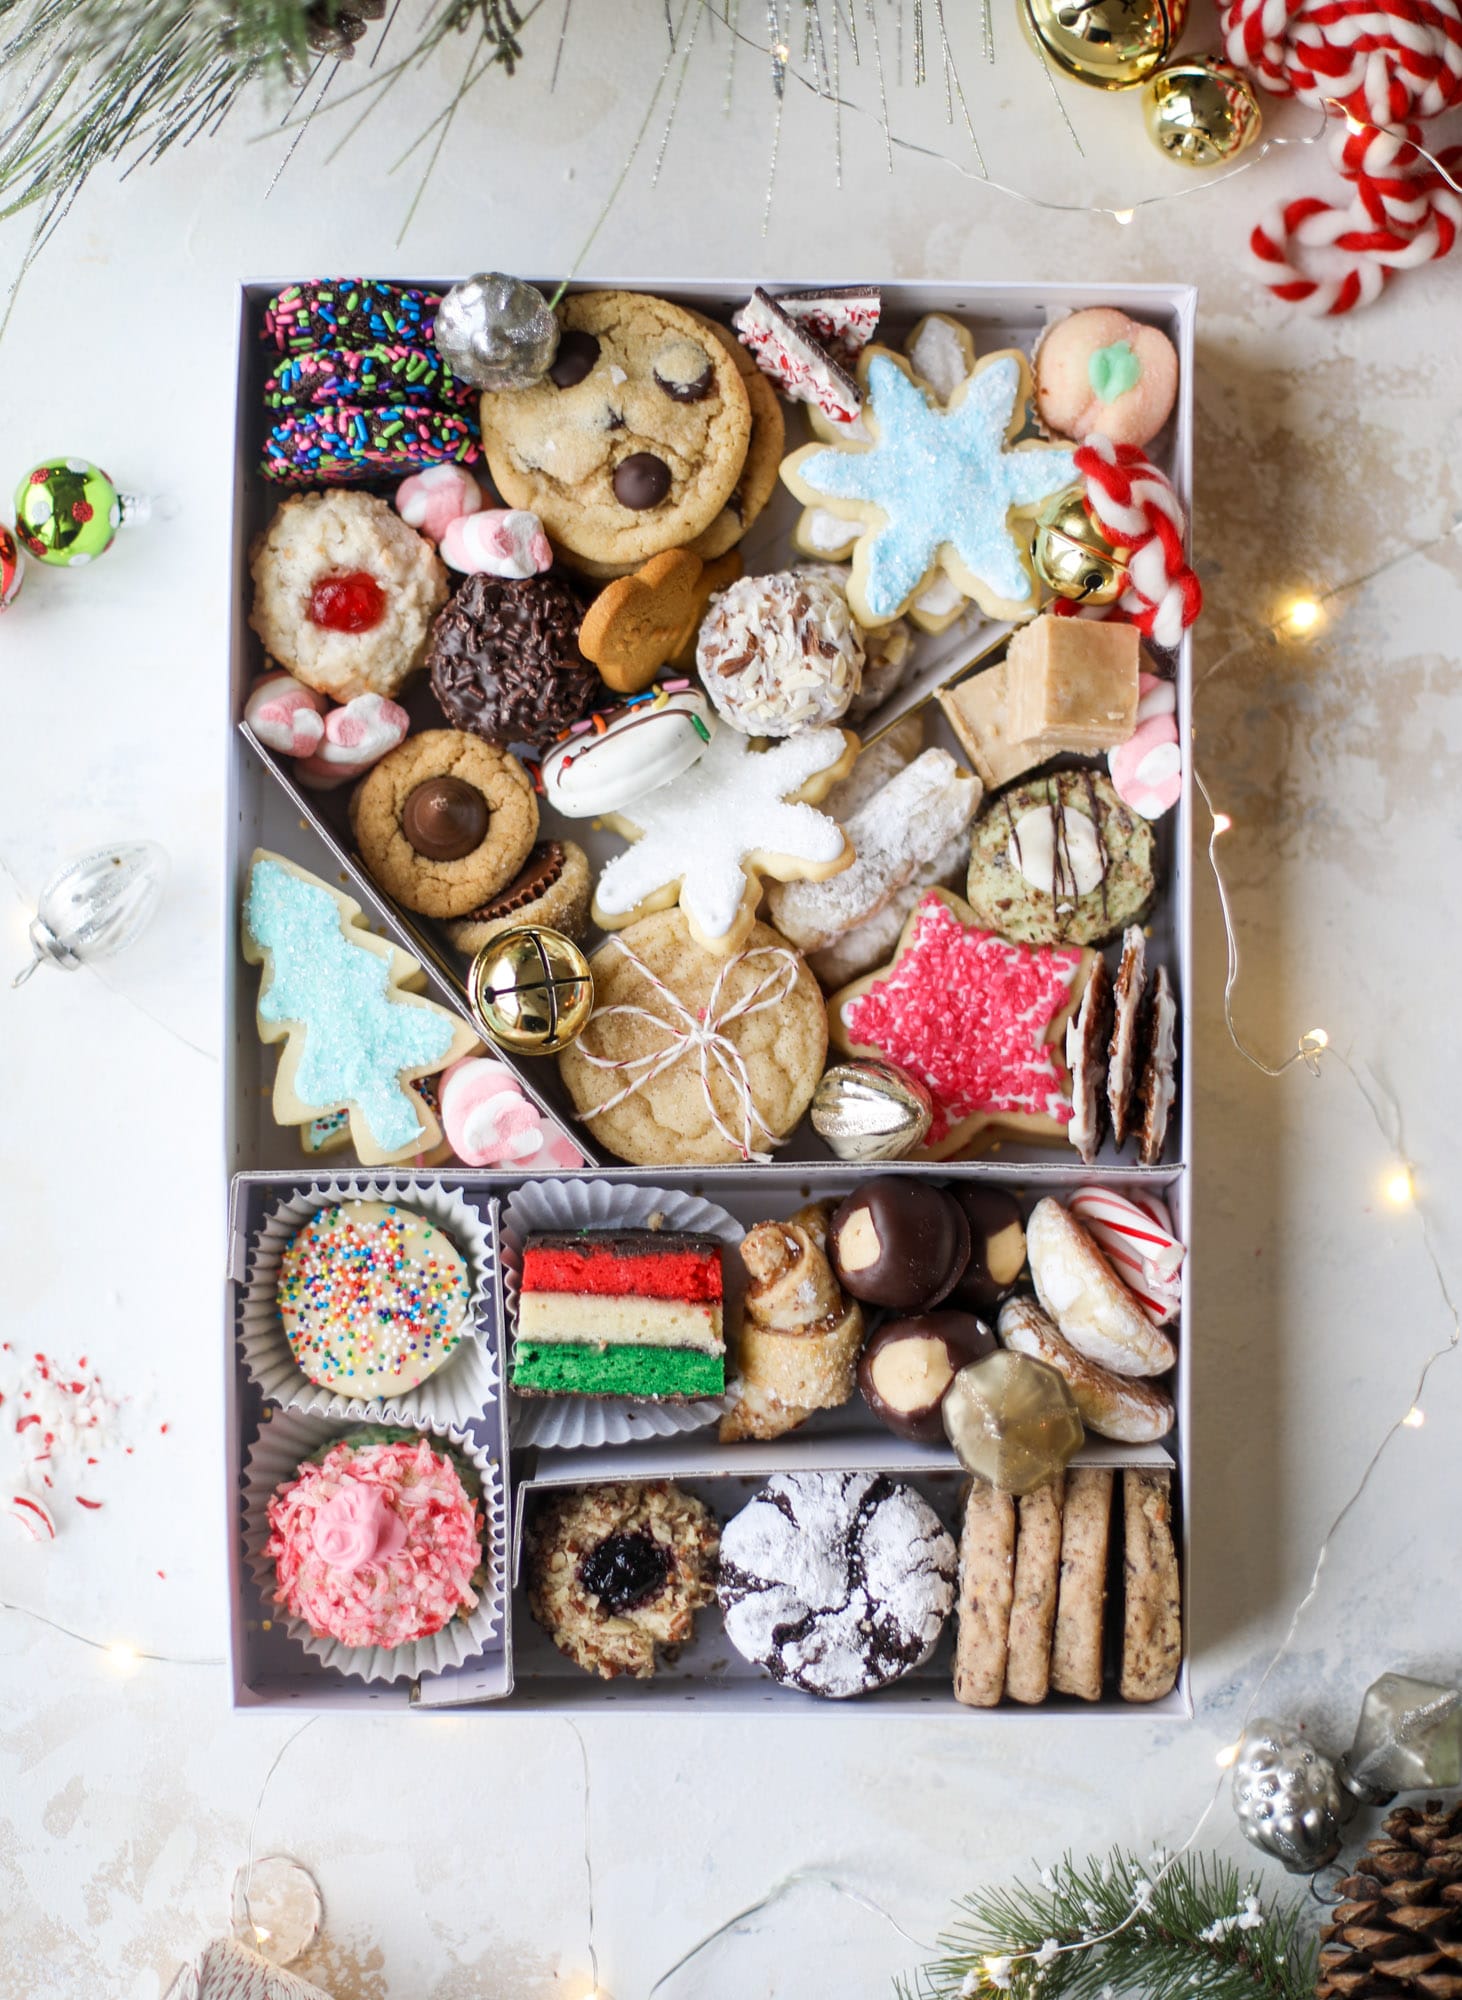 This list is made up of my 2018 best cookies to bake for Christmas and the holiday season! These are tried and true favorites that our friends and family love - ones we put on our cookie trays every single year! I howsweeteats.com #cookies #christmas #box